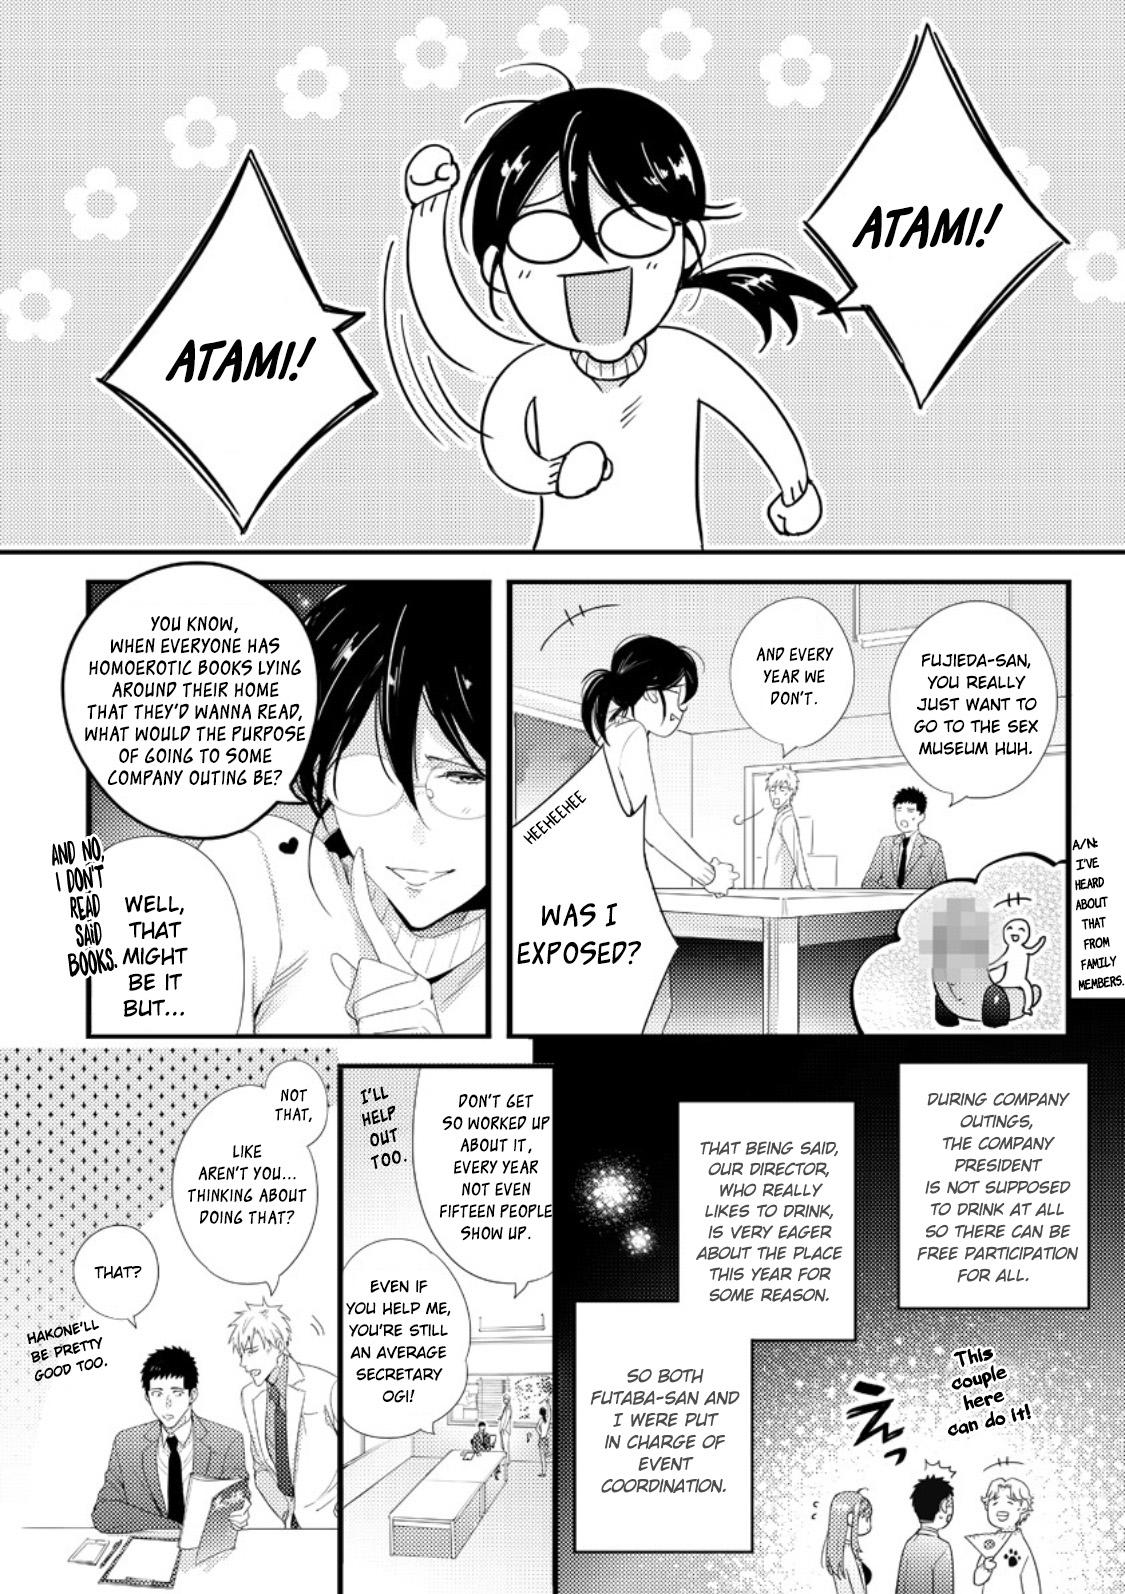 Beauty Please Let Me Hold You Futaba-san! Stepbrother - Page 4